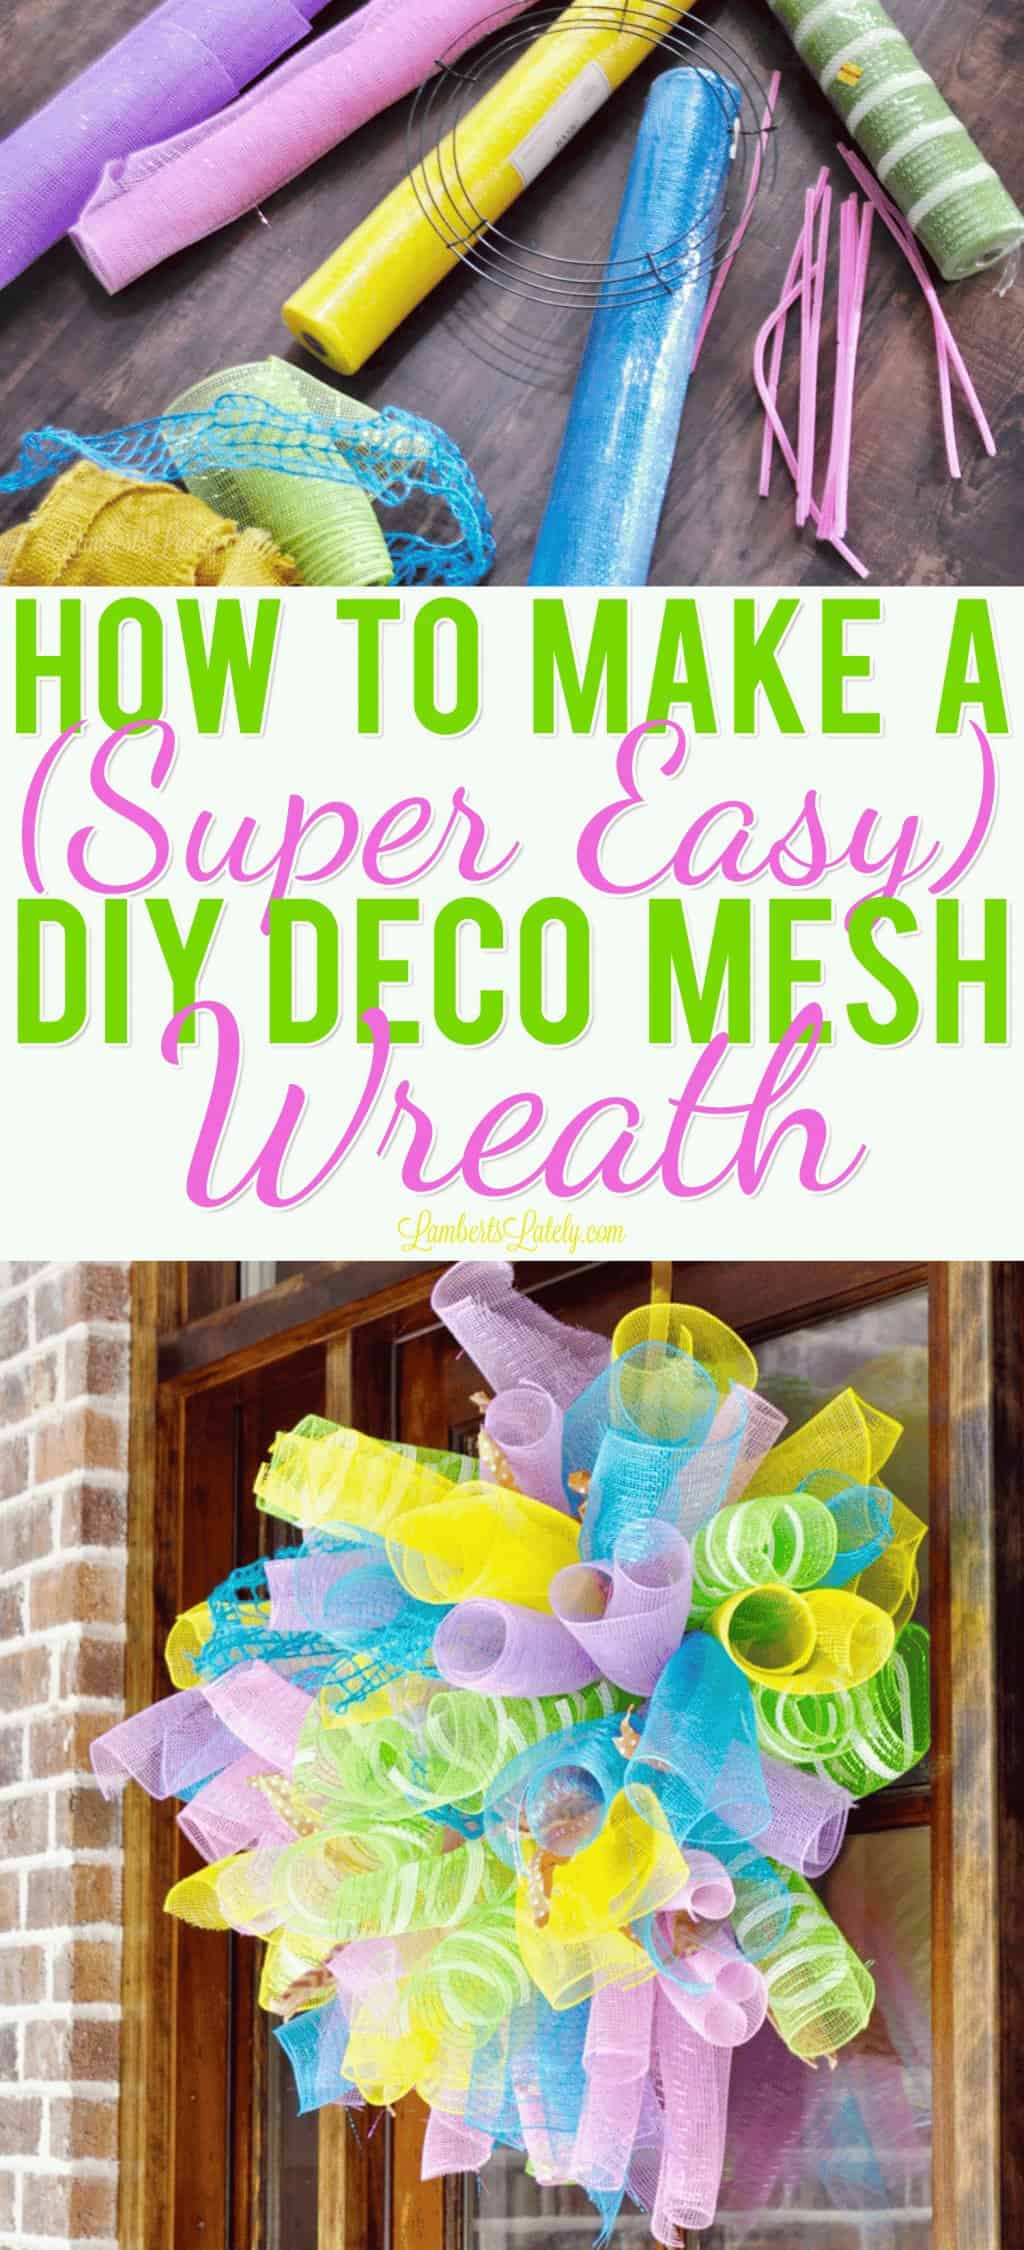 This tutorial for how to make a DIY Deco Mesh Wreath uses simple steps and can be used for spring or summer!  Make your own whimsical wreath at home with inexpensive materials.